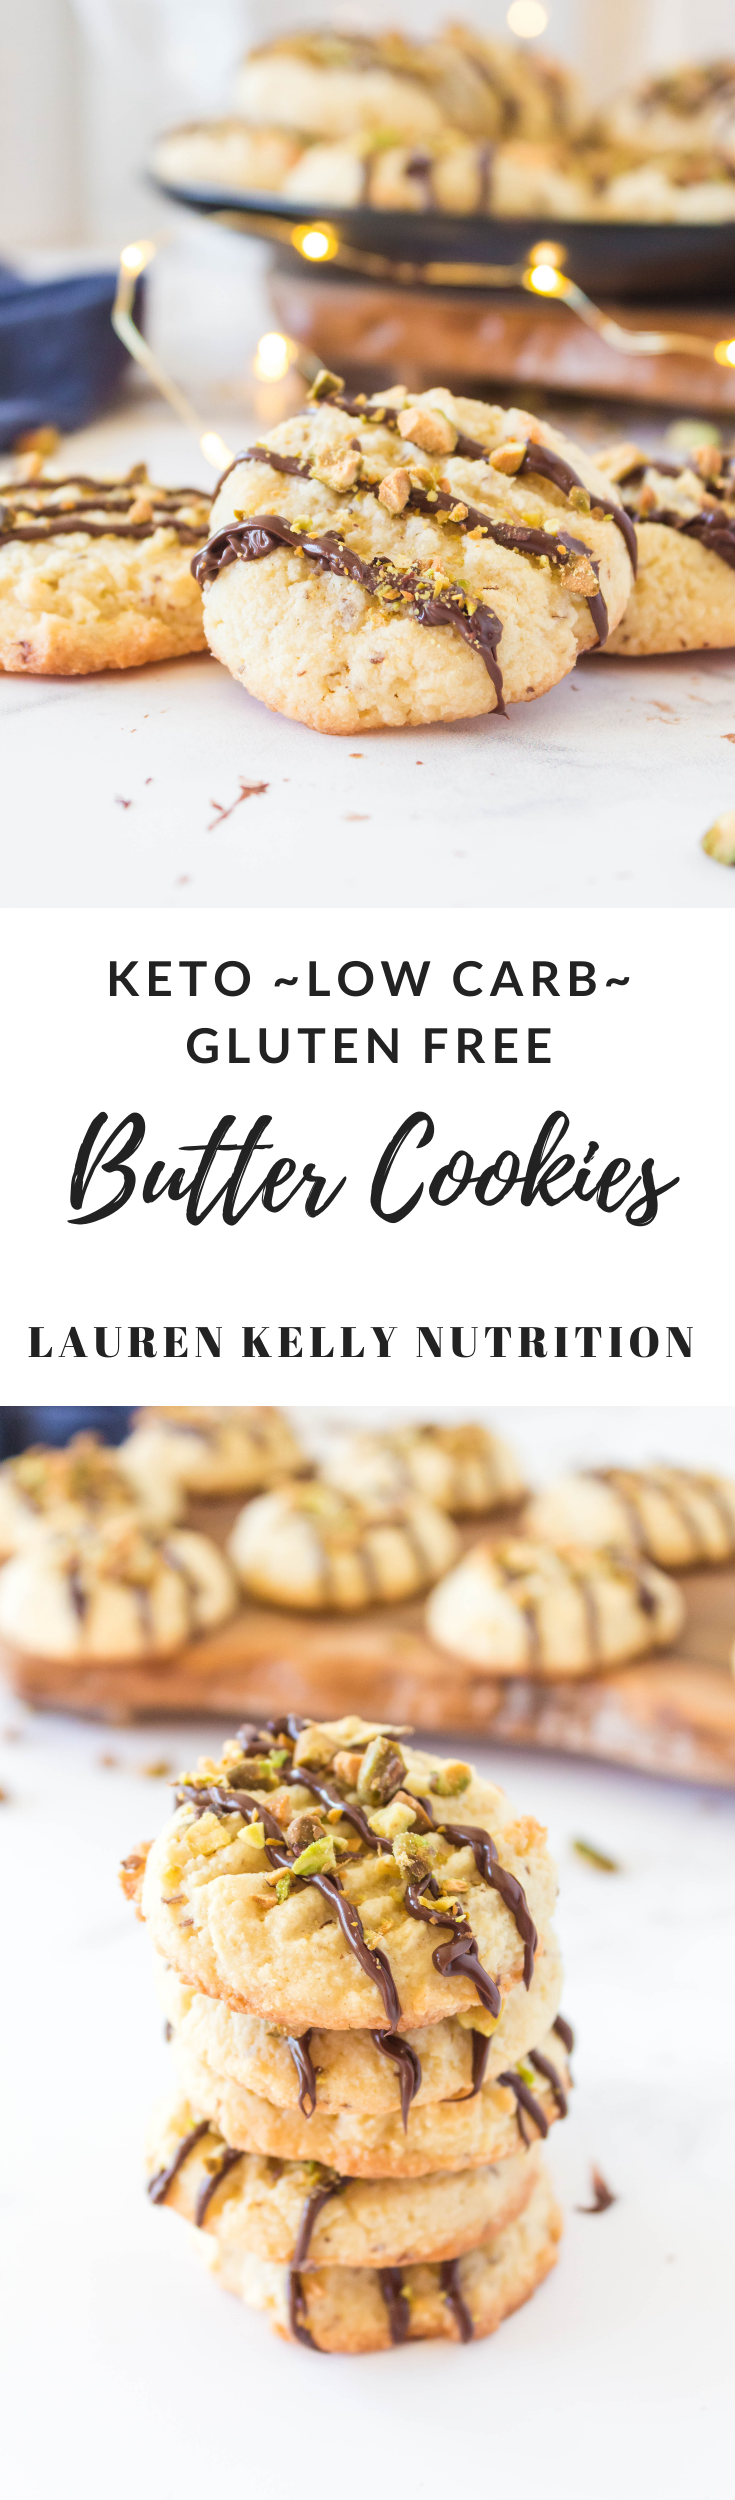 These delicious Butter Cookies from Lauren Kelly Nutrition are so easy to make, sugar free, gluten free low carb and keto!